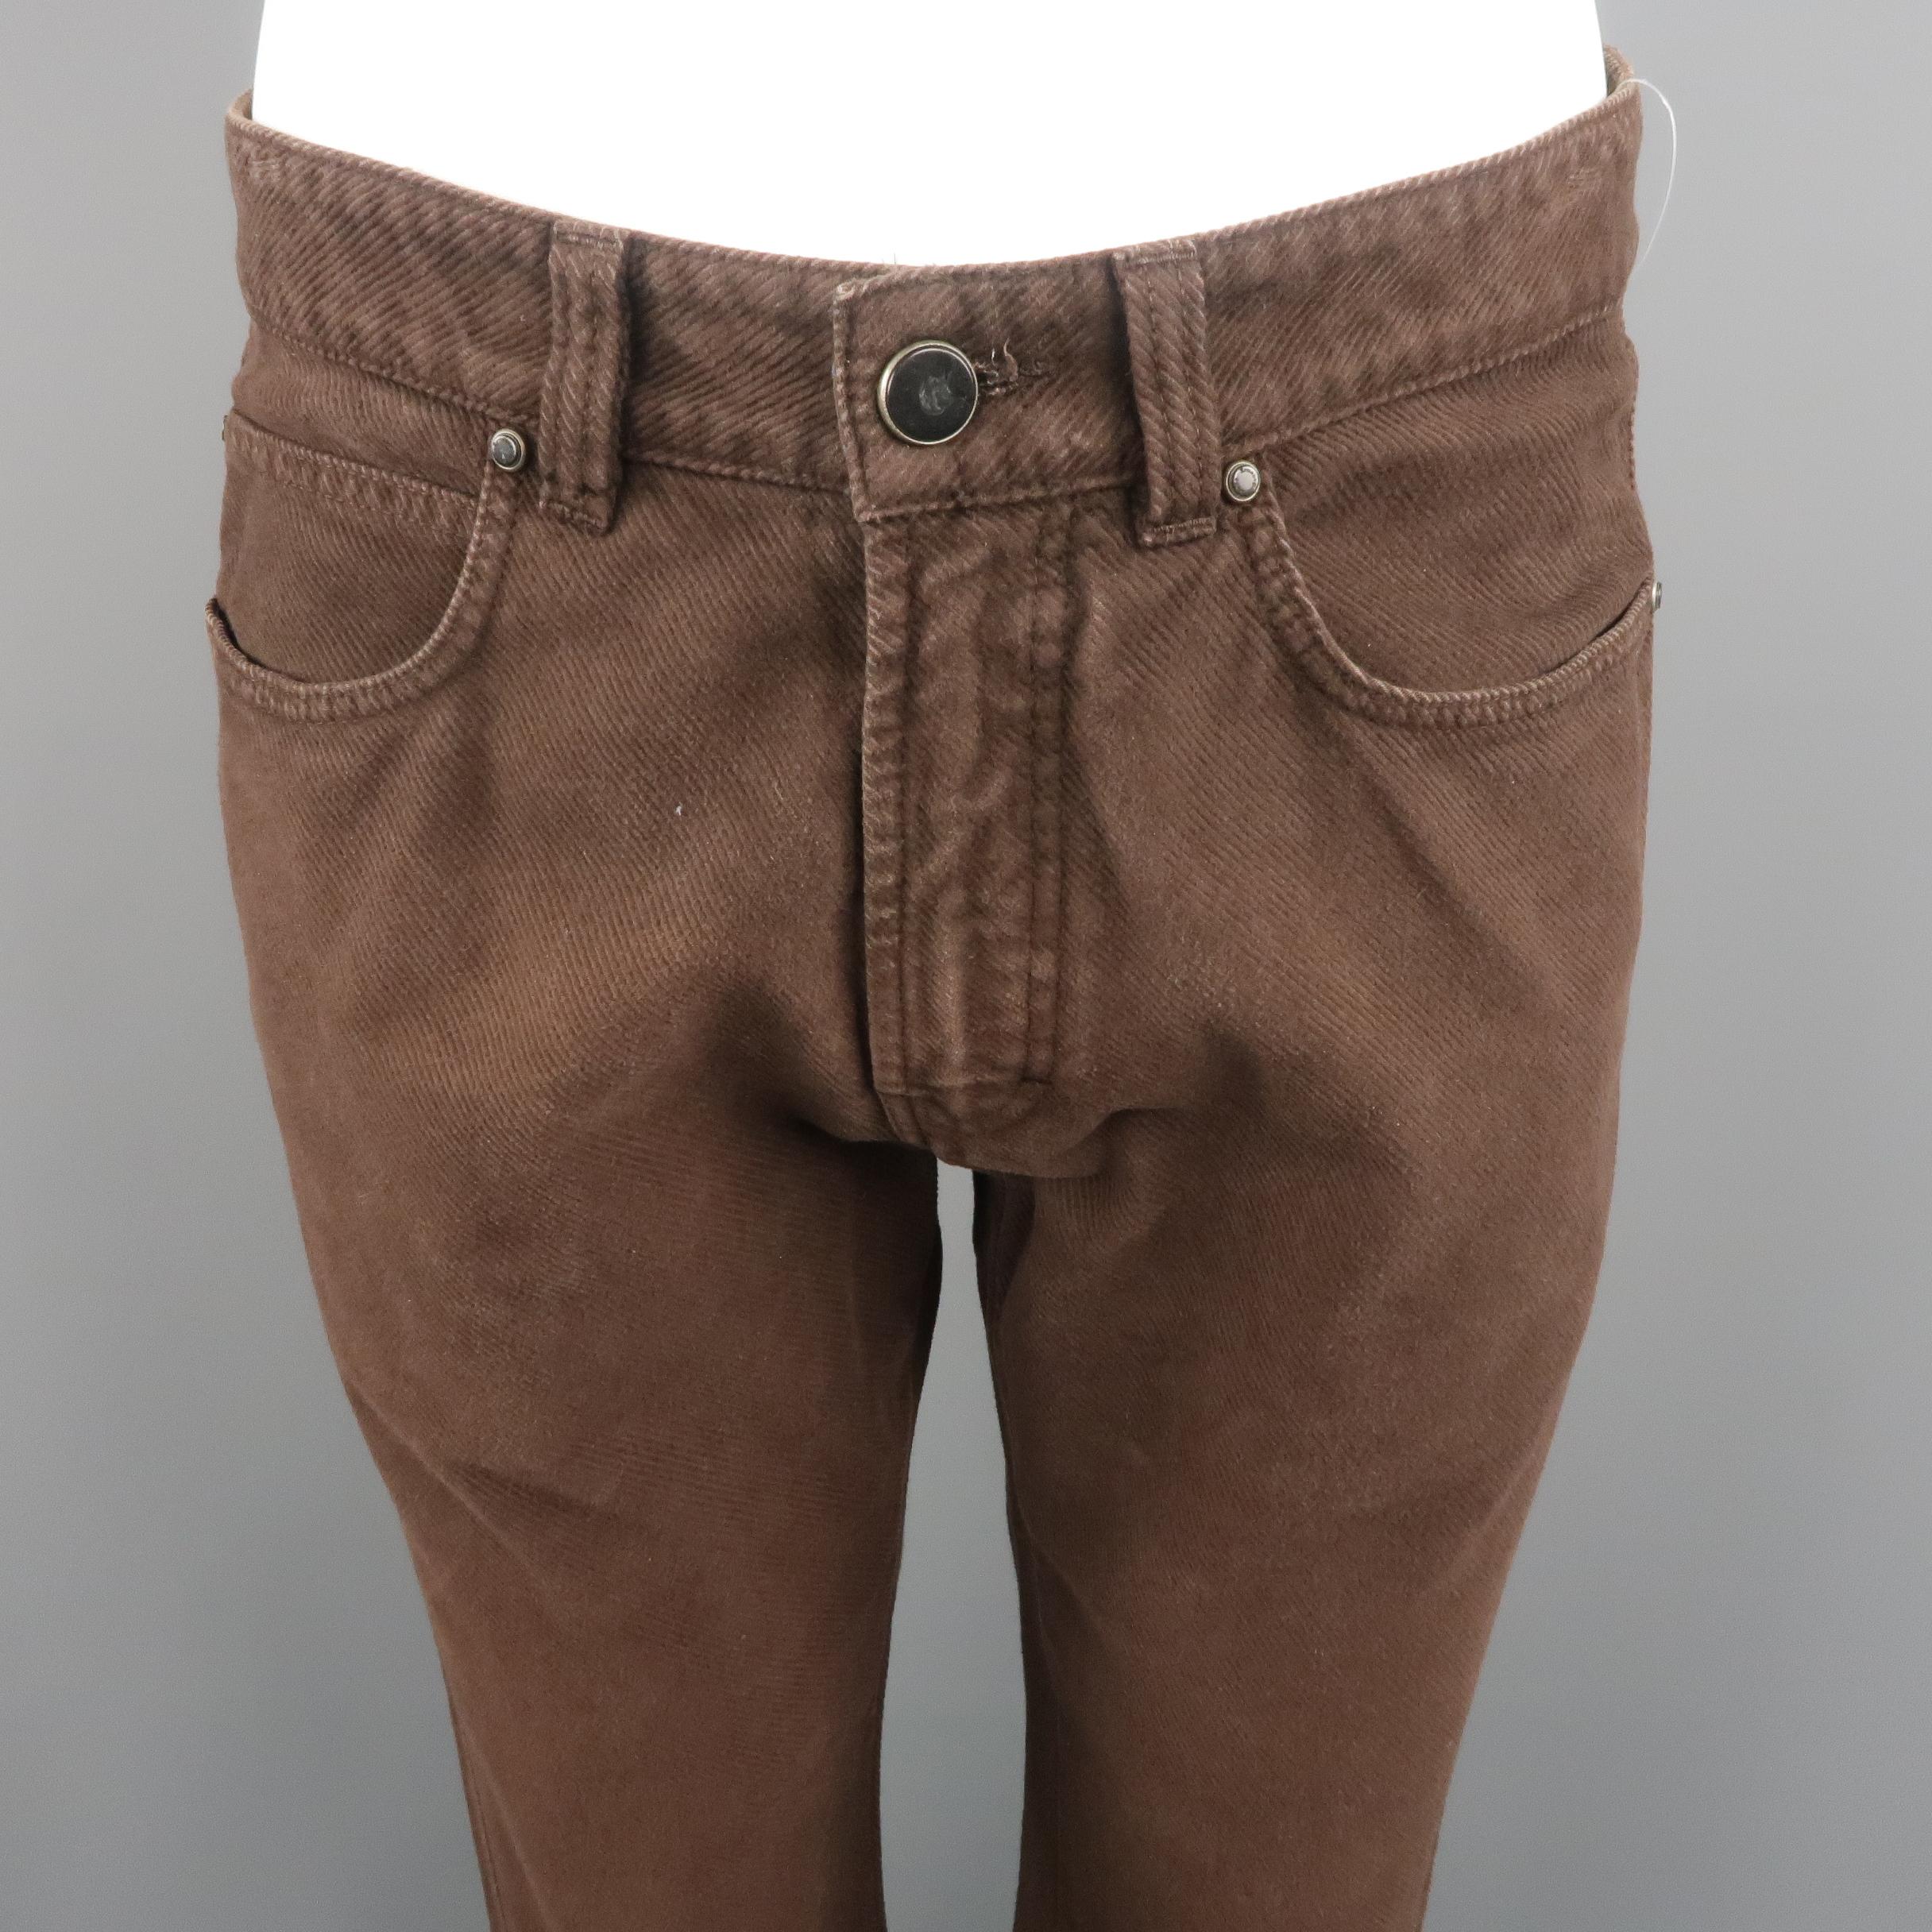 ERMENEGILDO ZEGNA jeans come in brown tone in solid cotton material with zip fly. Light marks of use with fading. Made in Italy.
 
Good Pre-Owned Condition.
Marked: 32  US
 
Measurements:
 
Waist: 32 in.
Rise: 10.5 in.
Inseam: 31 in.